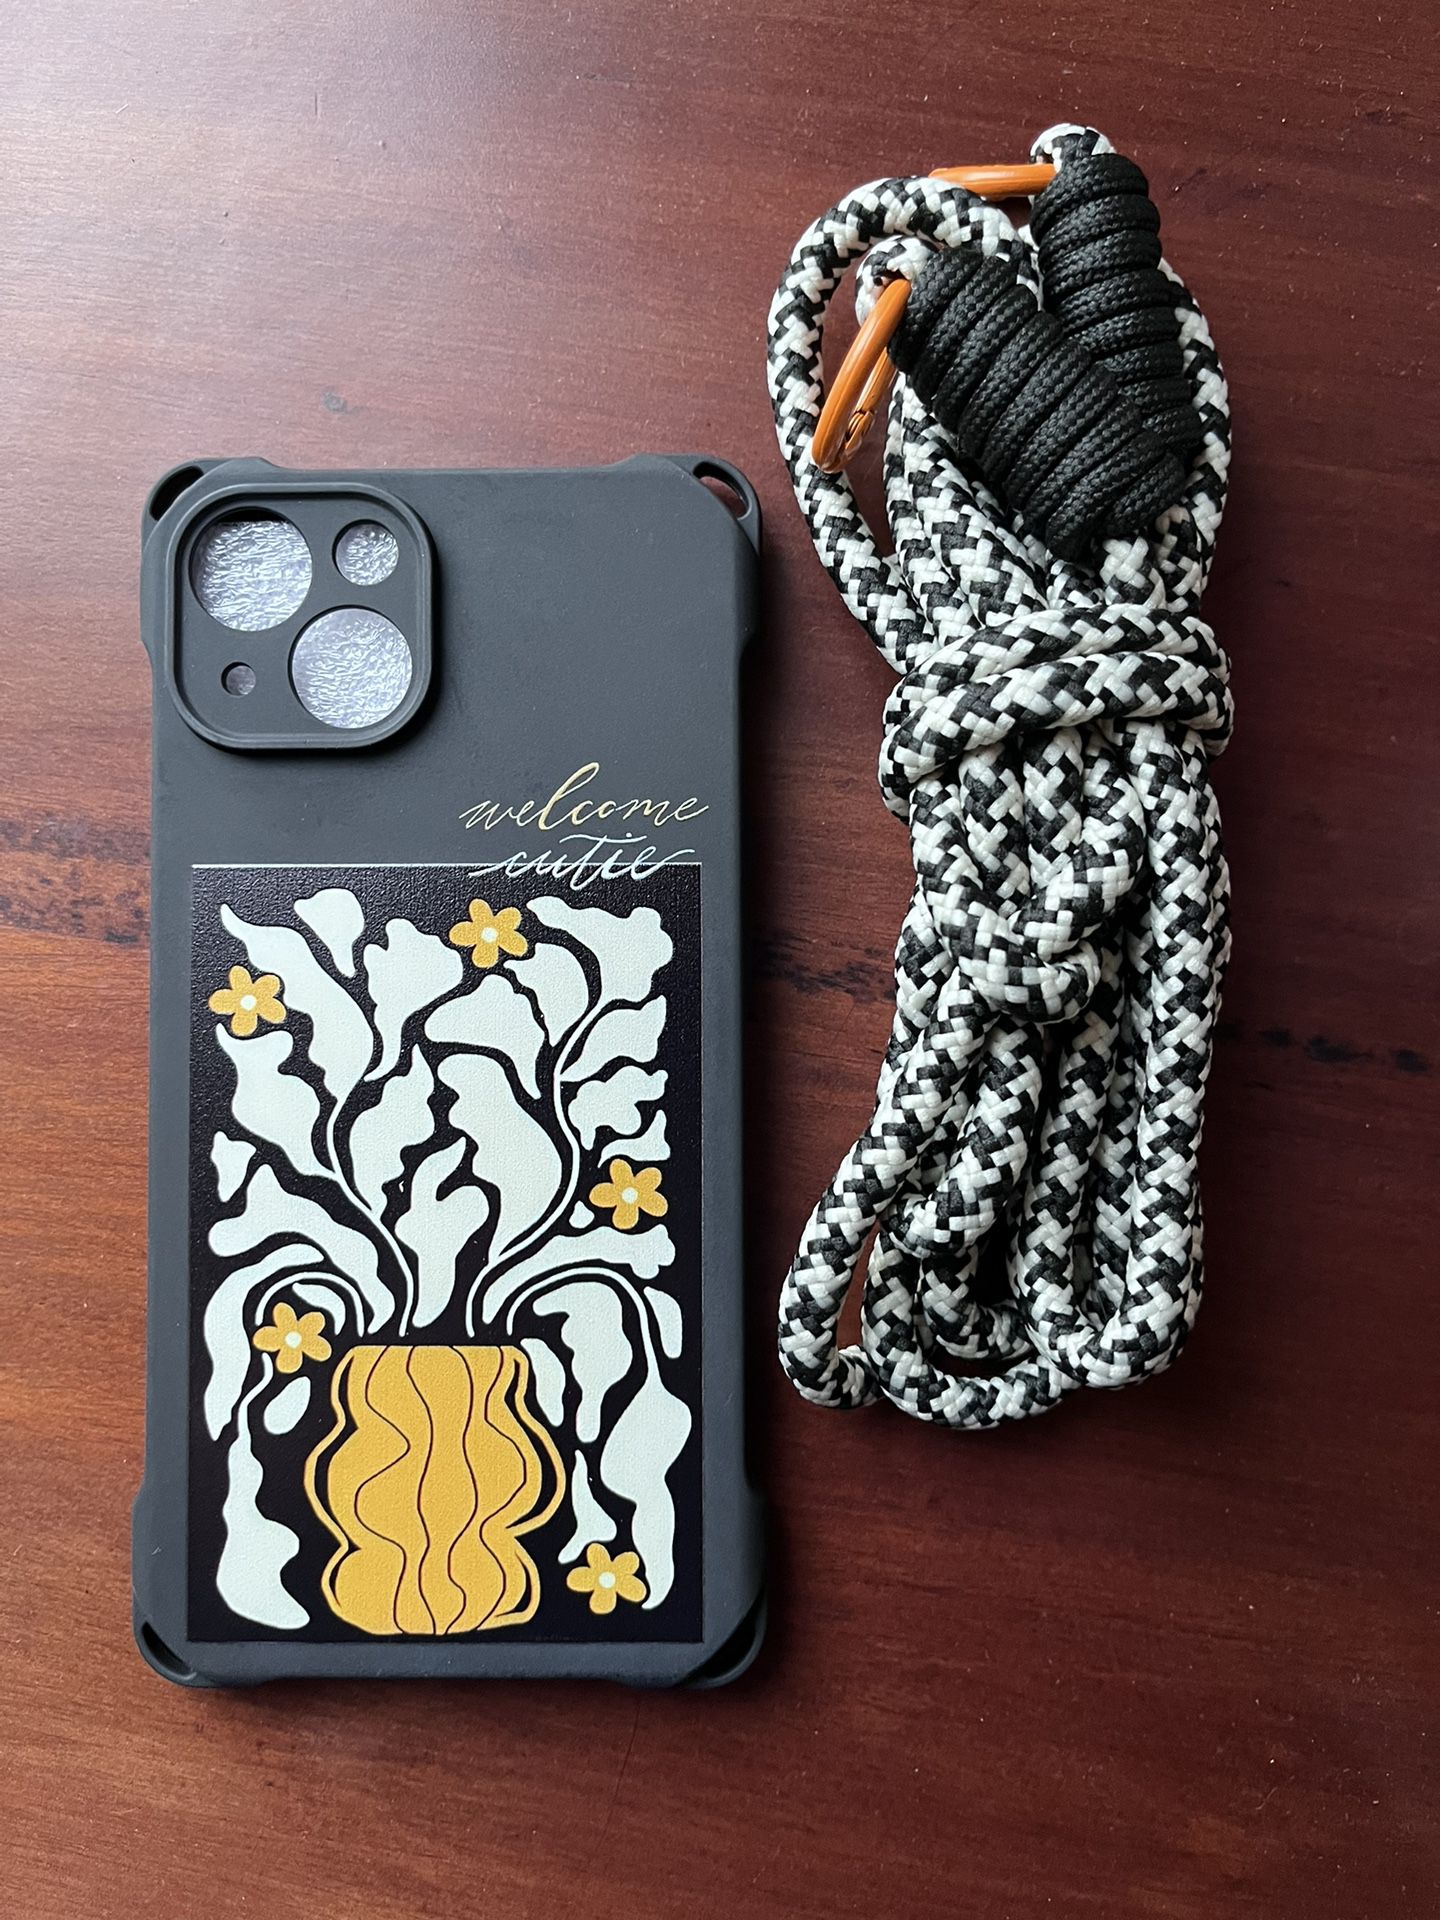 Hanging Rope Protective IPhone Case with floral design.